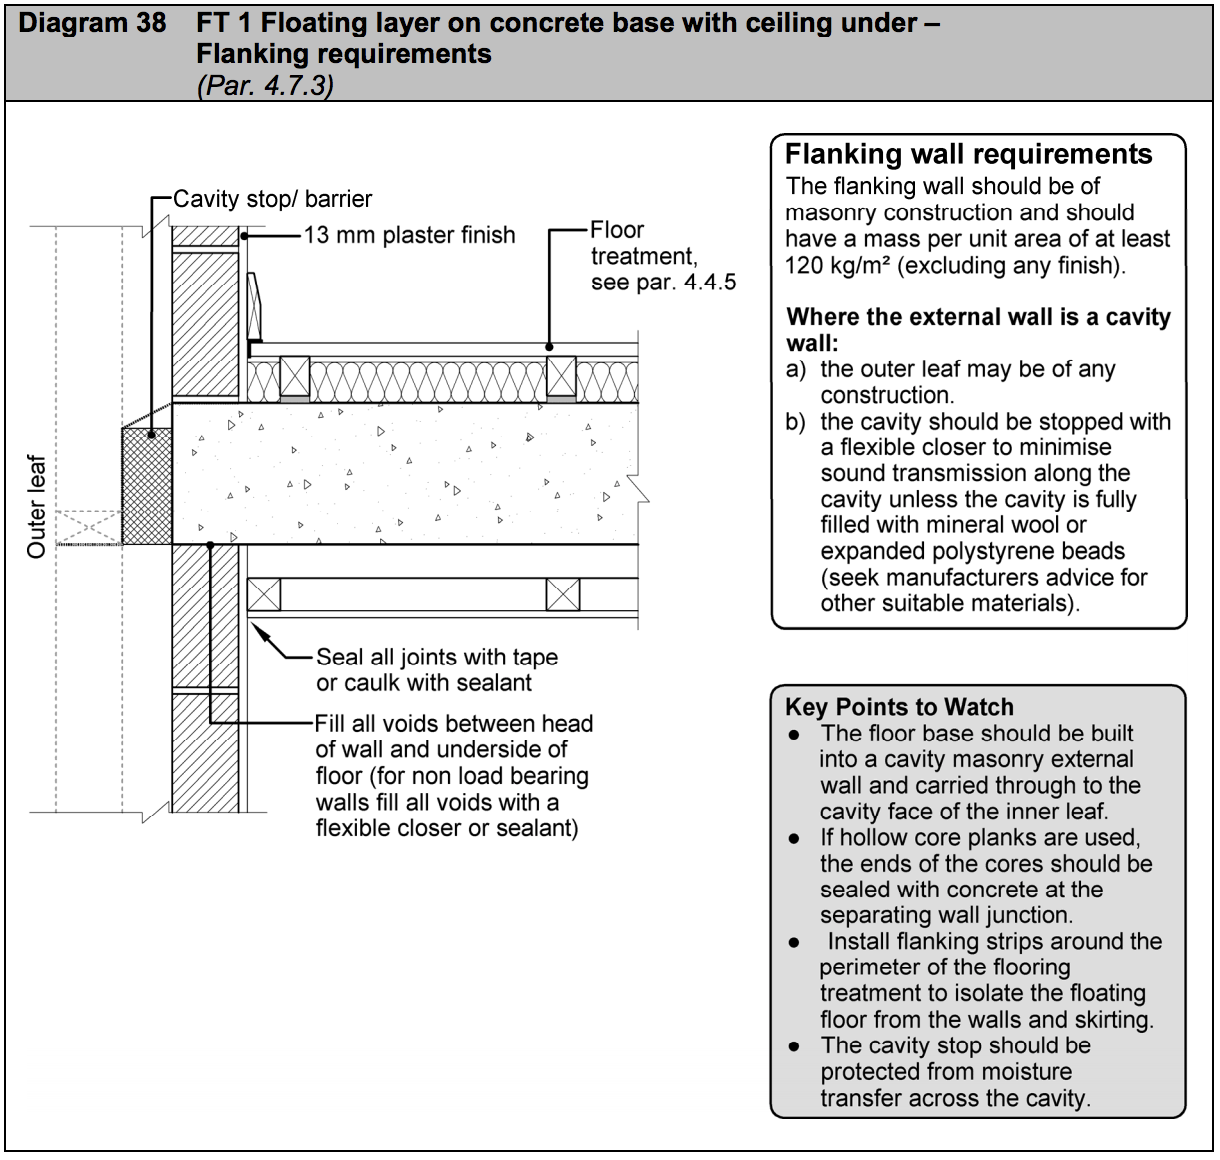 Diagram HE38 - FT 1 Floating layer on concrete base with ceiling under - flanking requirements - Extract from TGD E